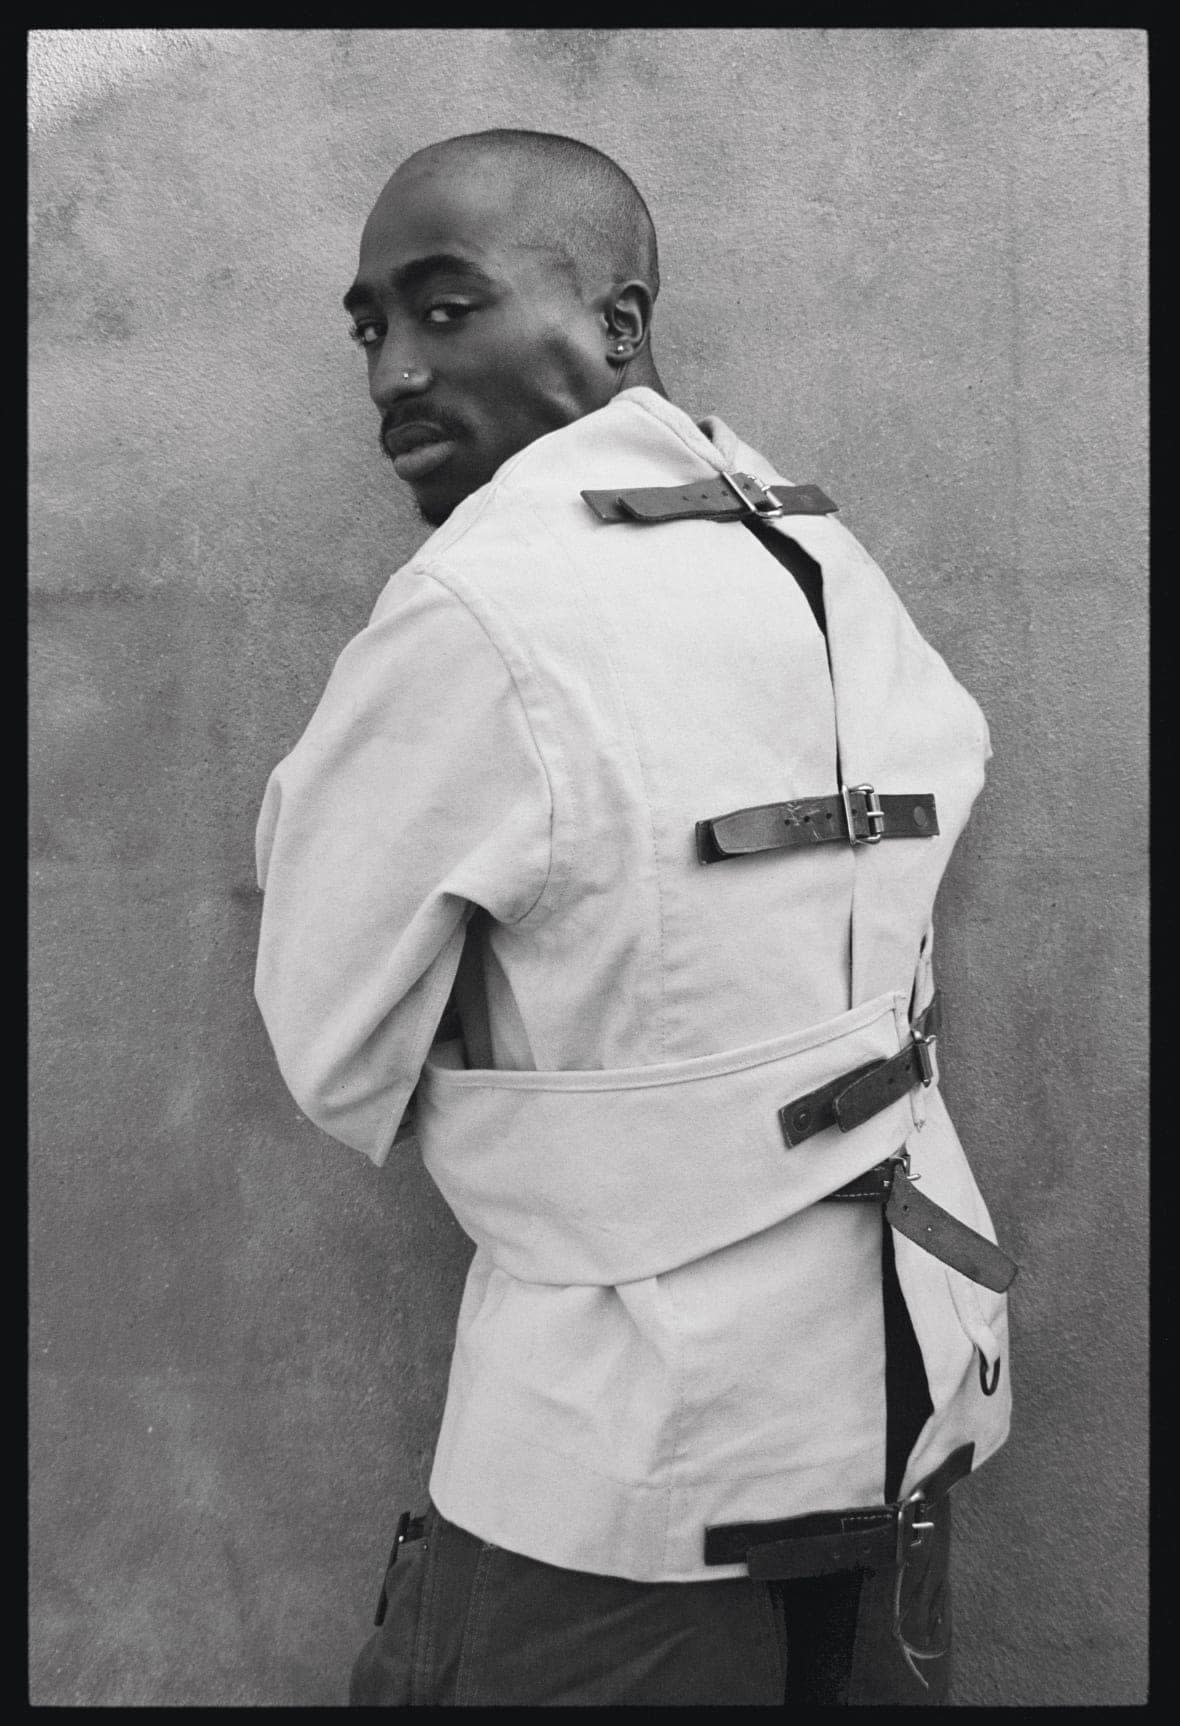 An image of 2Pac in a straight jacket is featured in the West Coast section of “Hip-Hop: Conscious, Unconscious.” (Photo by Shawn Mortensen – Provided by SME)